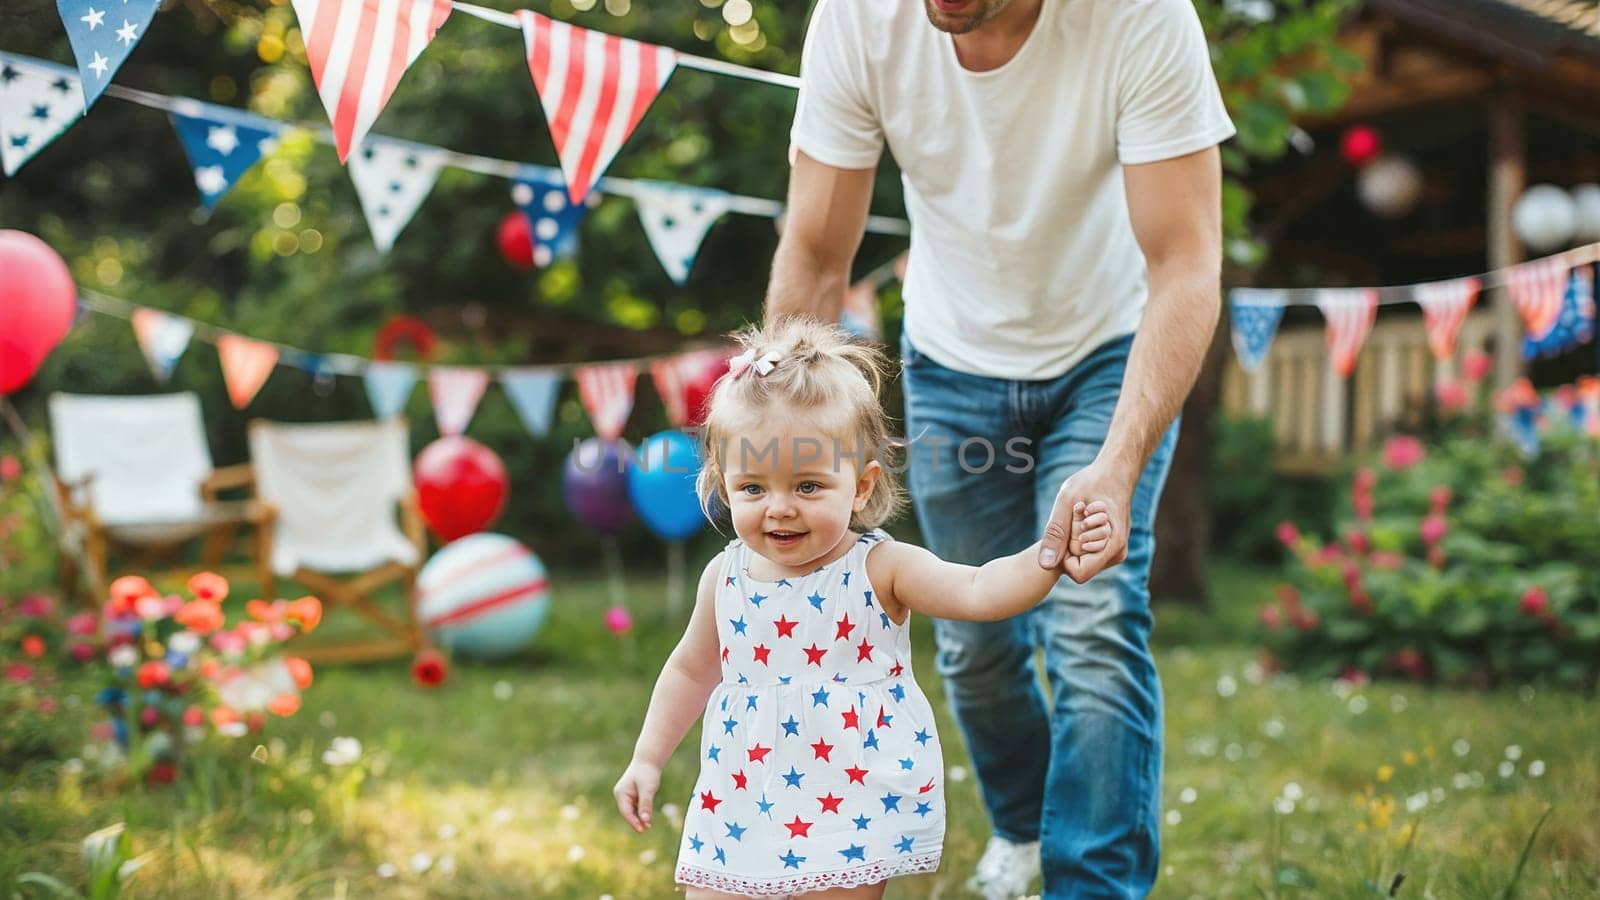 Girl in patriotic dress with dad celebrating Independence Day in the backyard